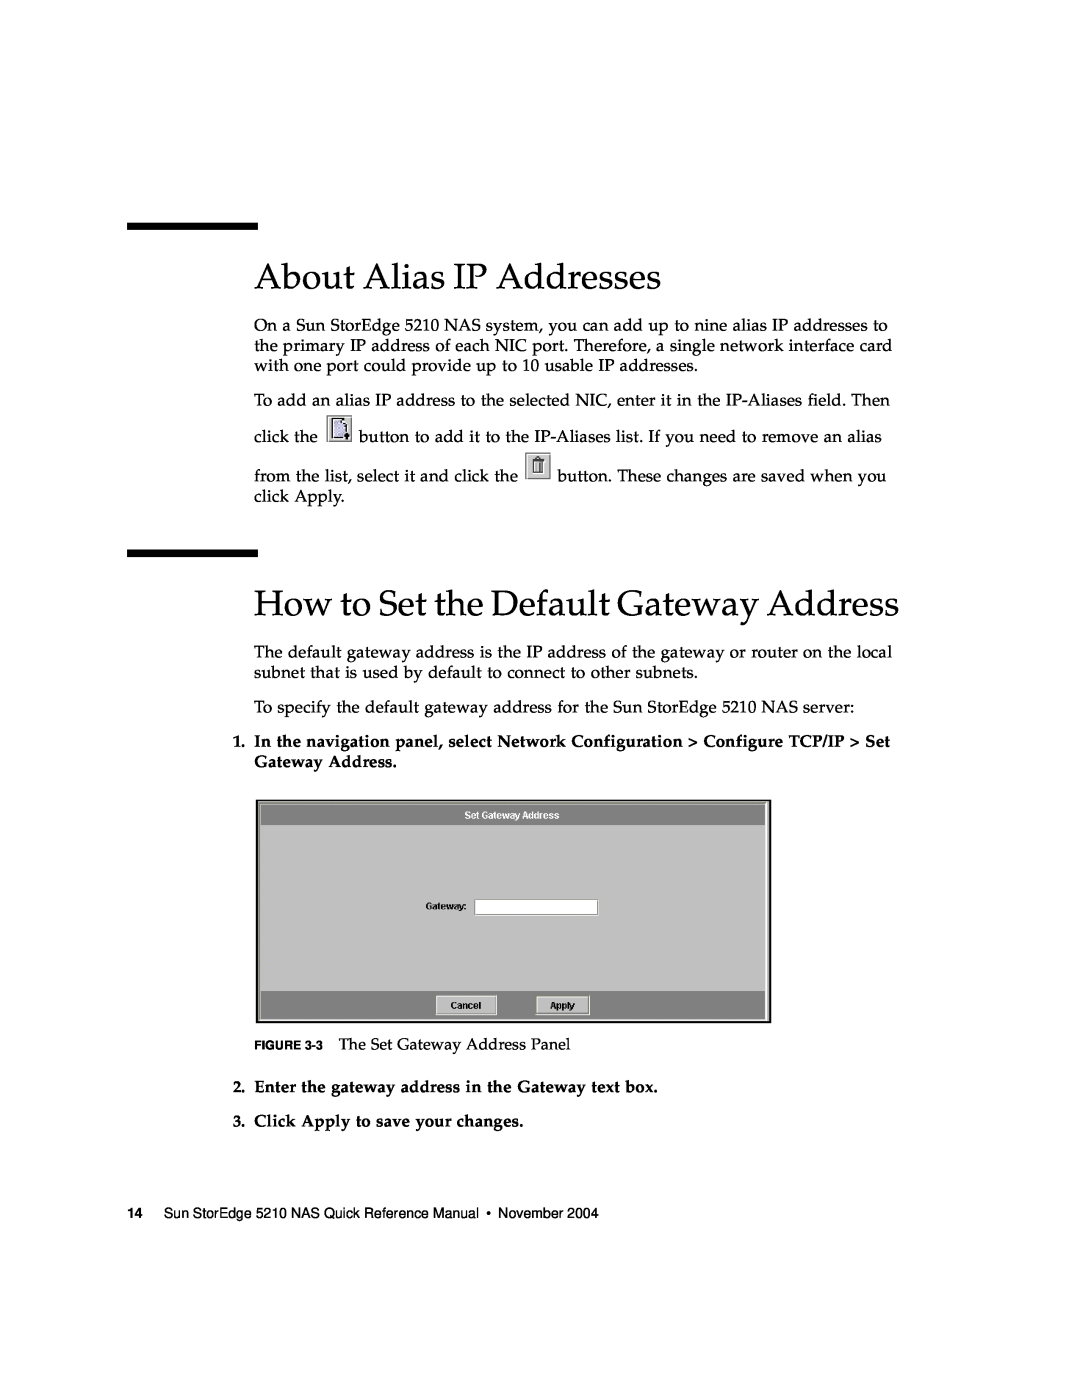 Sun Microsystems 5210 NAS manual About Alias IP Addresses, How to Set the Default Gateway Address 